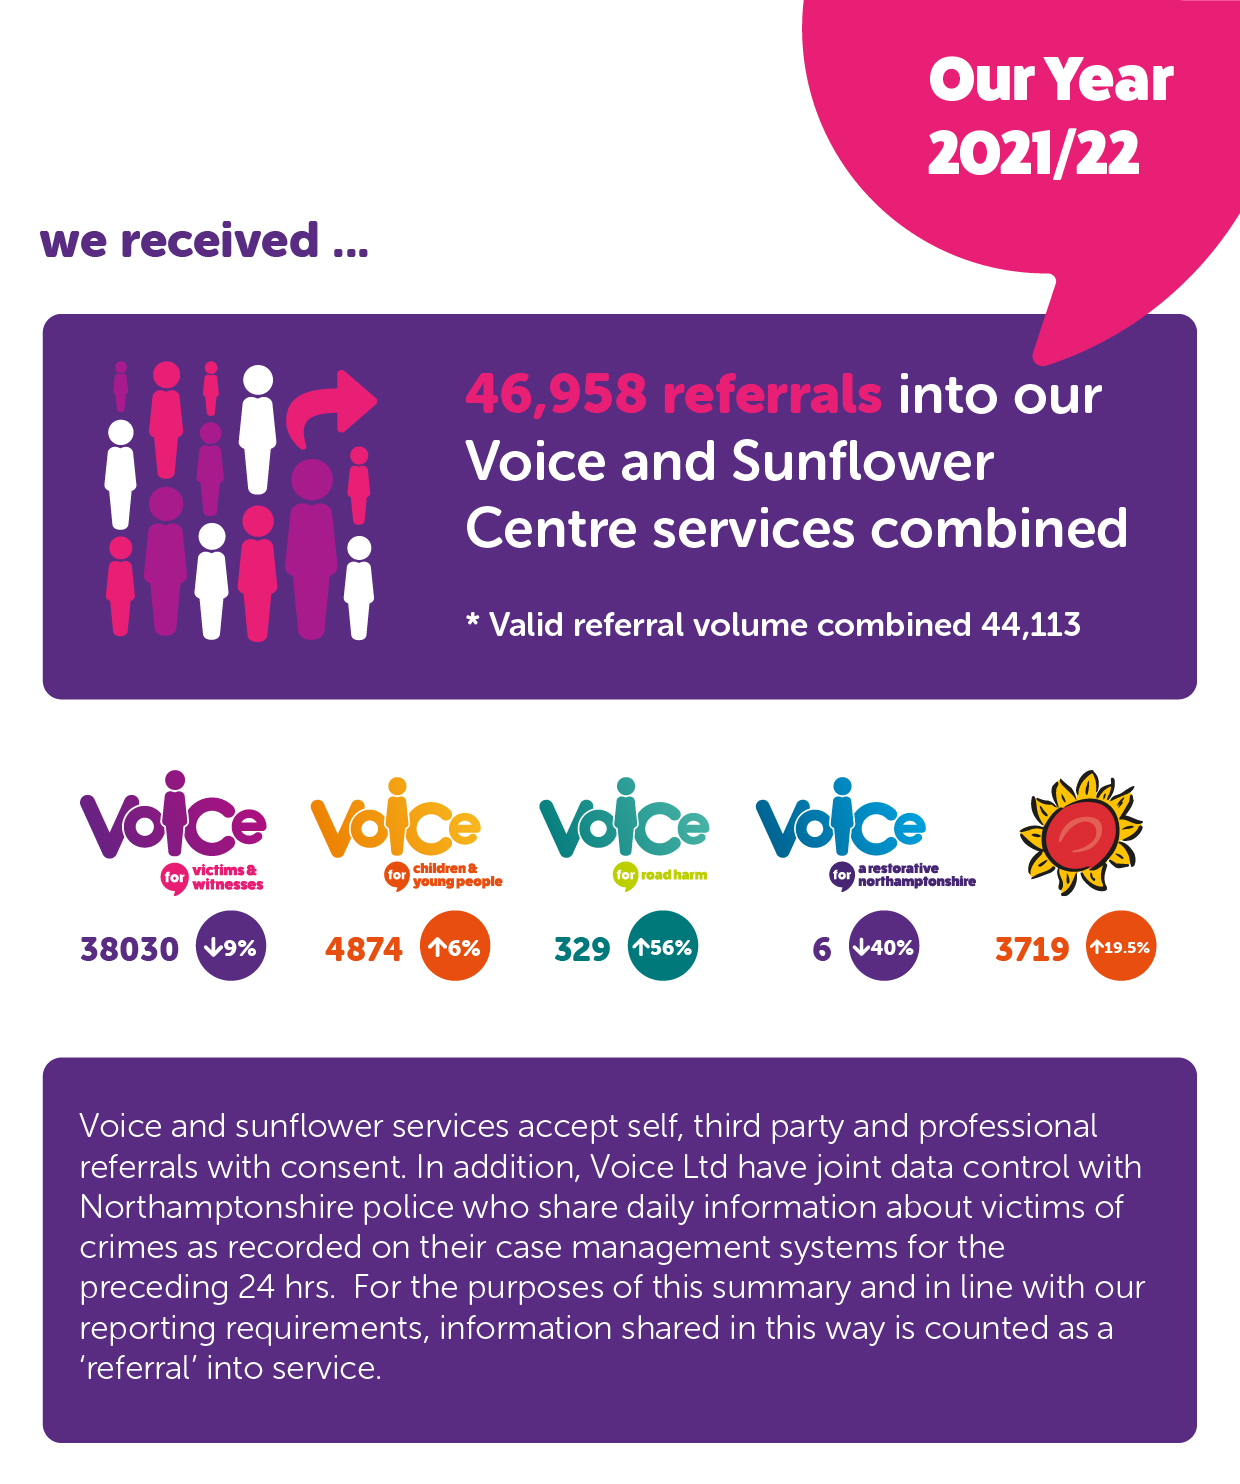 Our Year 2021/22 We received ... 46,958 referrals into our Voice and Sunflower Centre services combined * Valid referral volume combined 44,113 • 38030 for victims and witnesses • 4874 for children and young people • 329 for road harm • 6 for restorative northamptonshire • 3719 for the sunflower centre Voice and sunflower services accept self, third party and professional referrals with consent. In addition, Voice Ltd have joint data control with Northamptonshire police who share daily information about victims of crimes as recorded on their case management systems for the preceding 24 hrs. For the purposes of this summary and in line with our reporting requirements, information shared in this way is counted as a ‘referral’ into service.